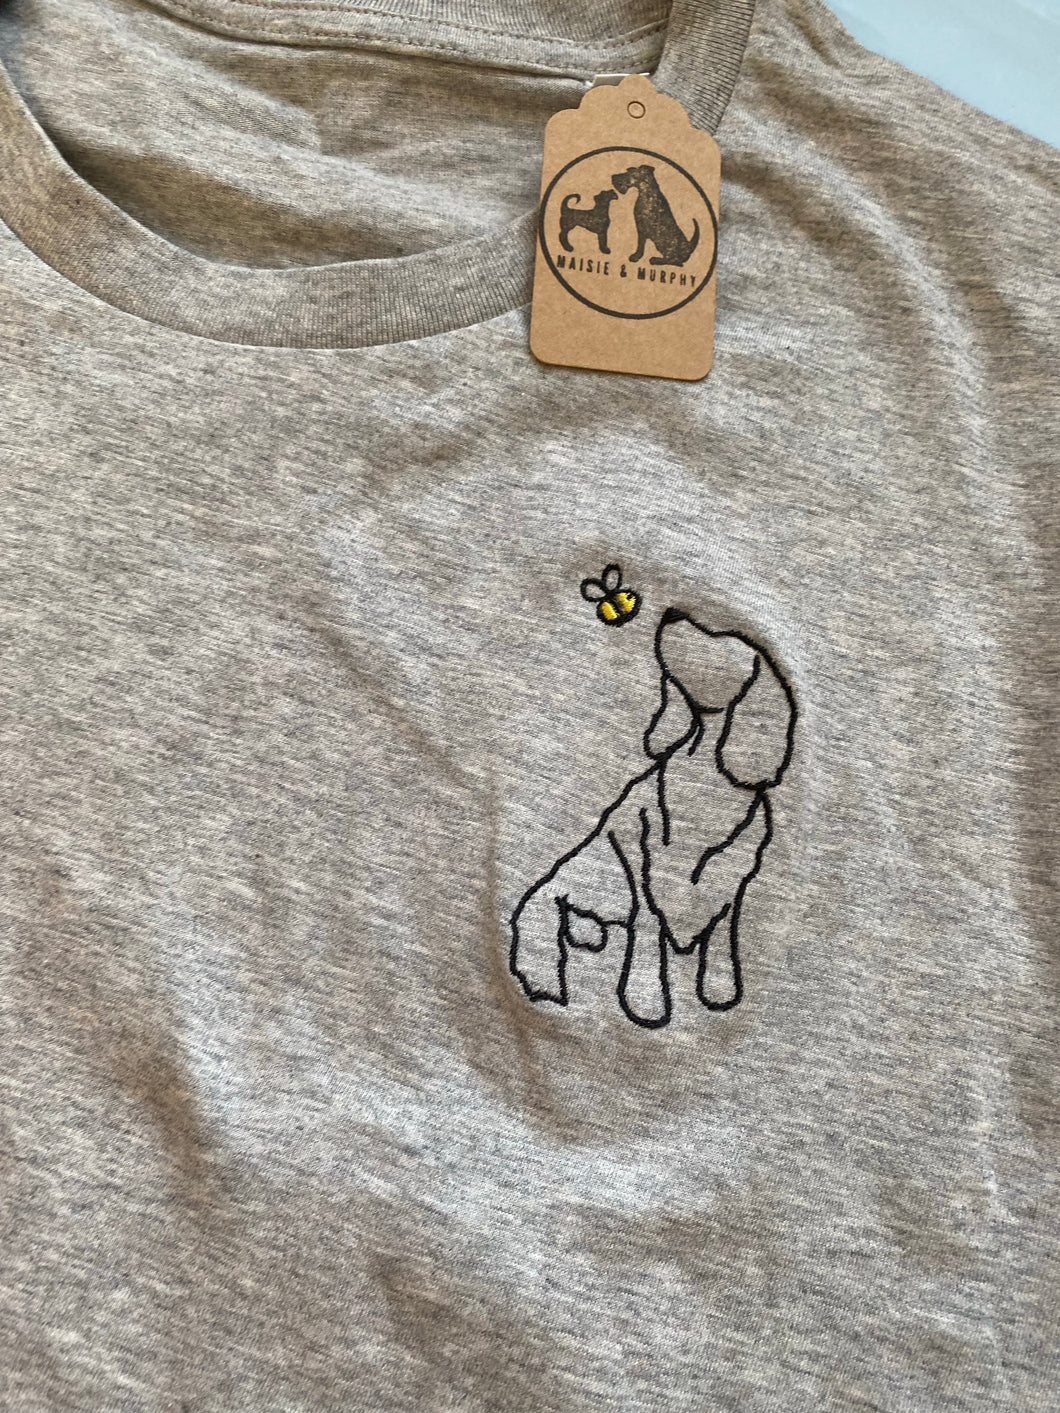 Spaniel Outline T-shirt - embroidered spaniel organic tee for dog lovers and owners